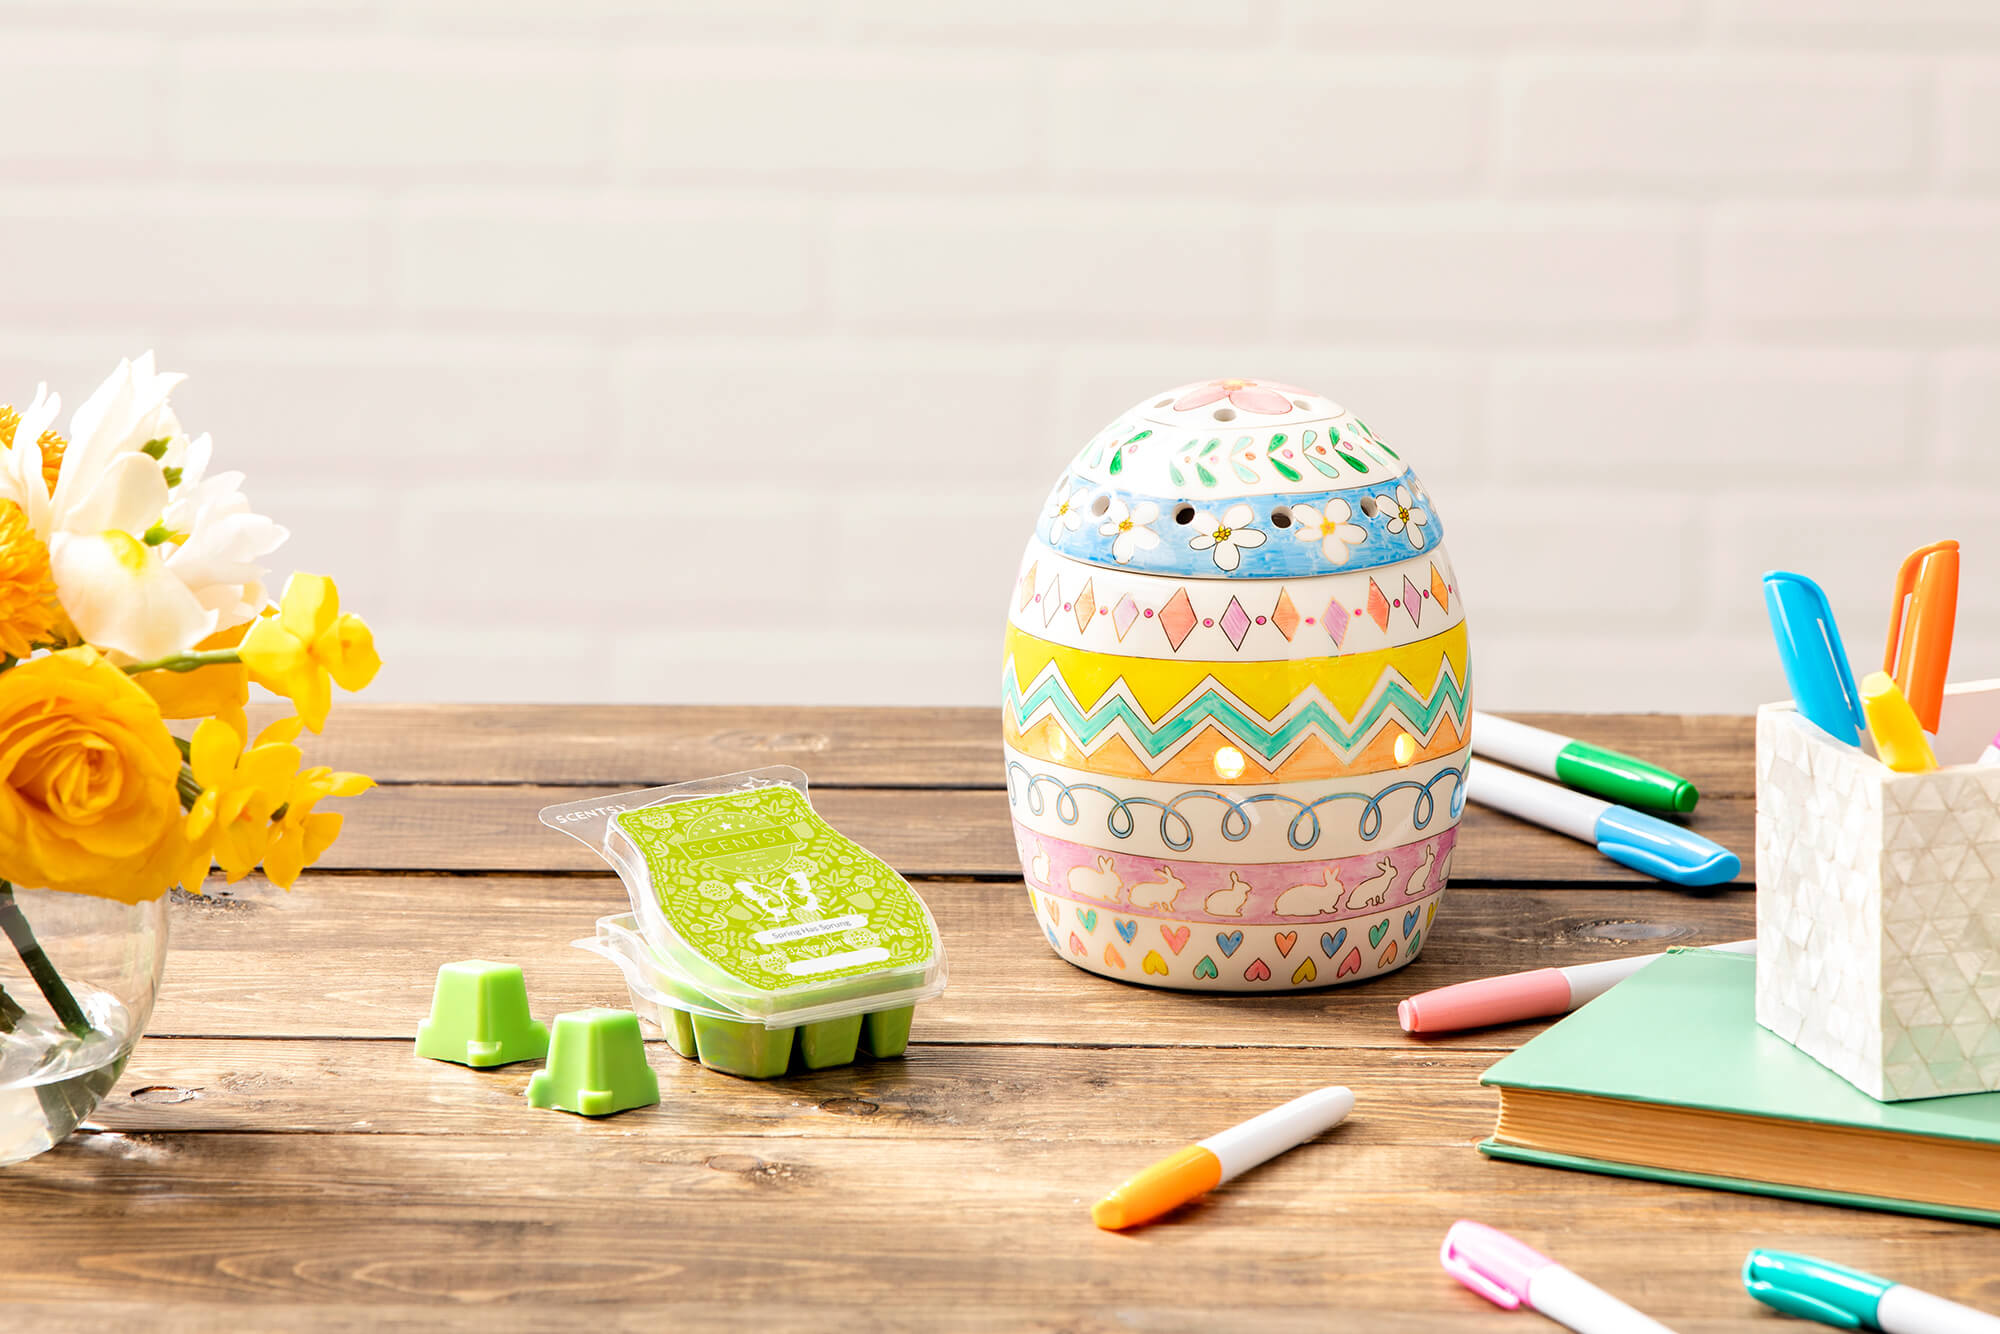 Scentsy's Egg-Spress yourself warmer and Spring Has Sprung scent